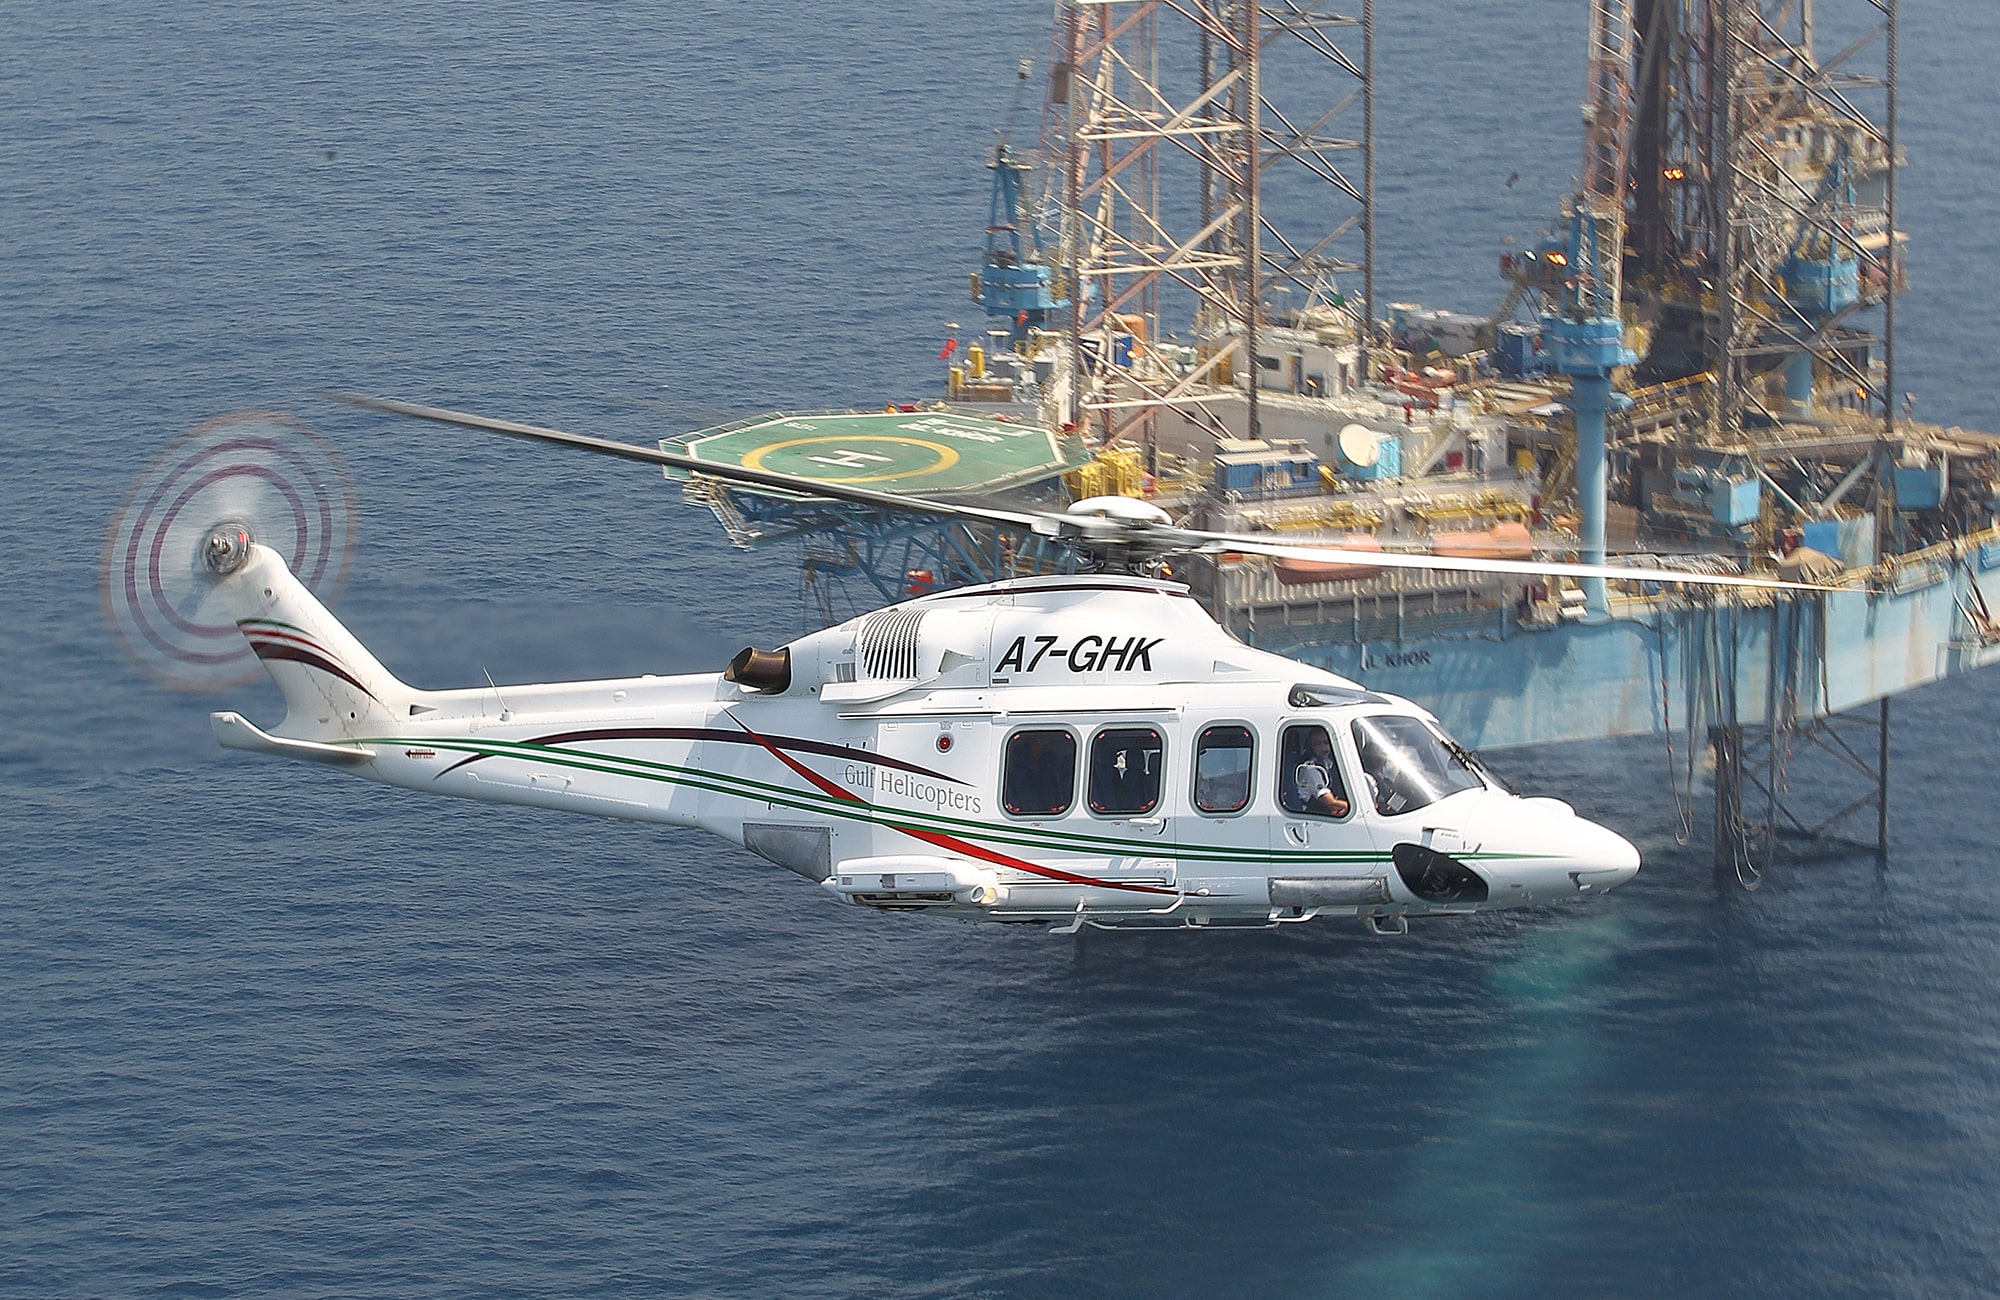 World Offshore Helicopters Market Forecast 2019-2023